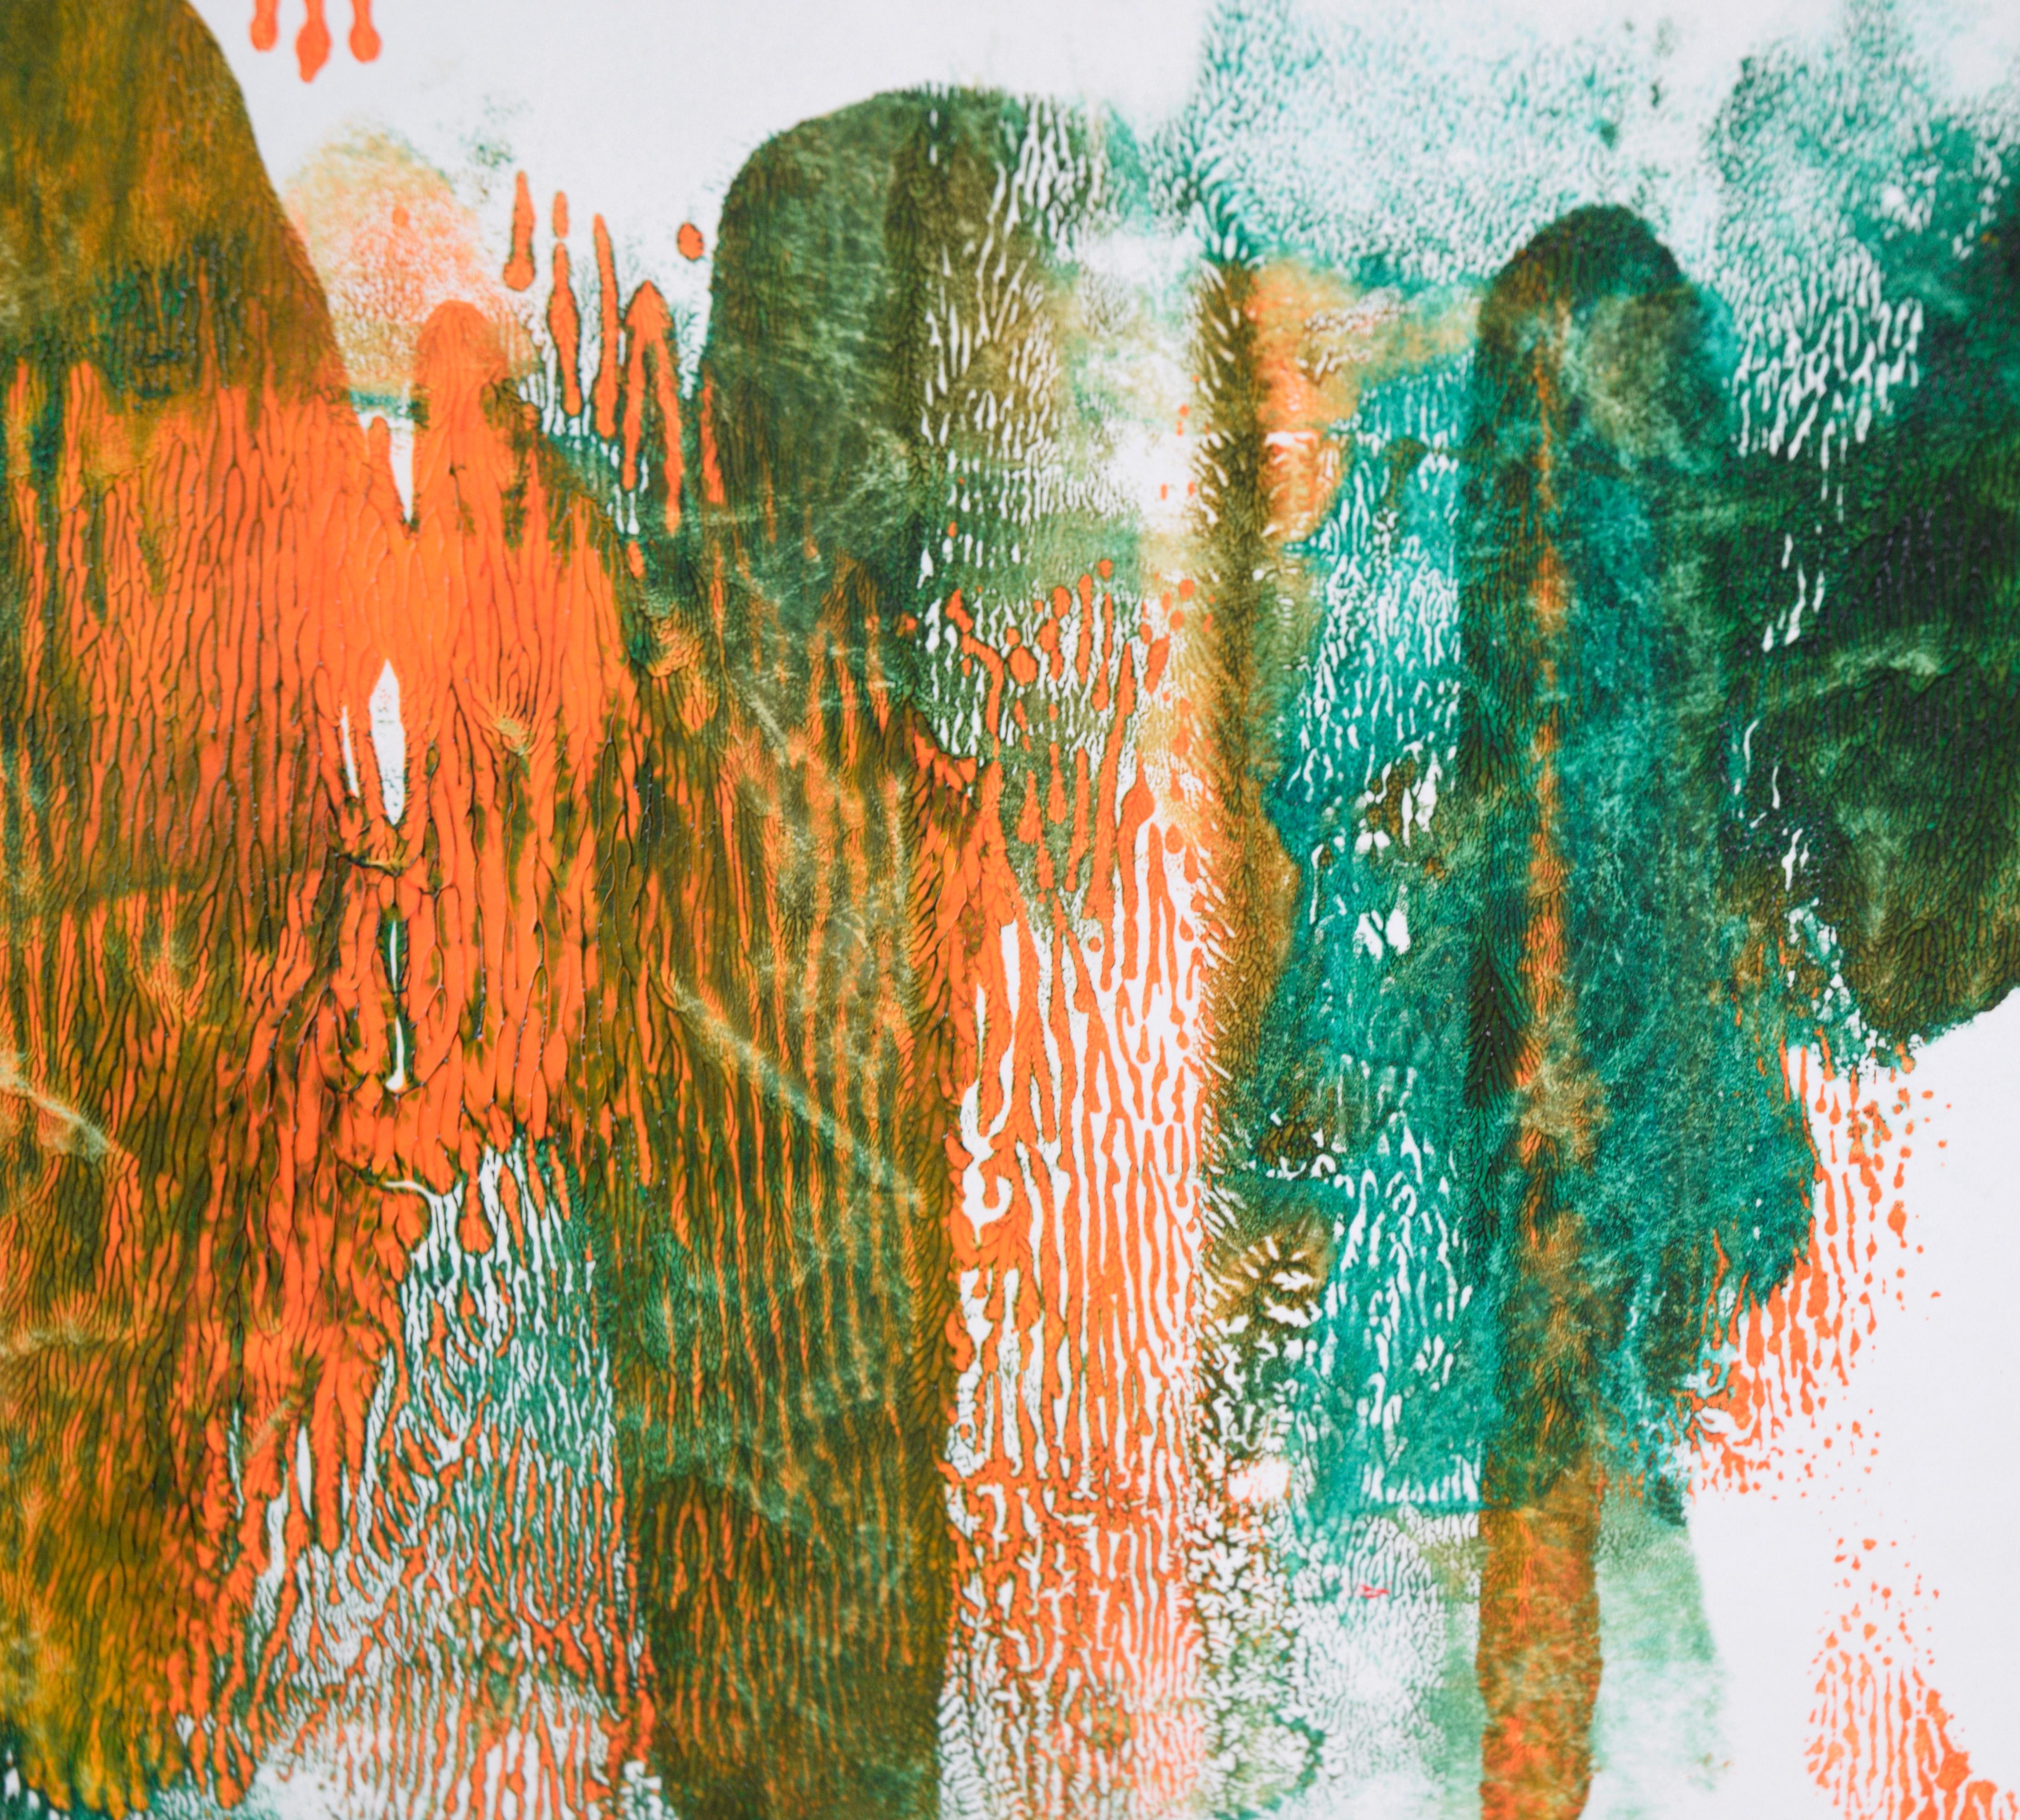 Green and Orange Abstract Composition in Acrylic on Paper

A bold abstract painting by California-based artist Ricardo de Silva (American/Brazil, 20th C). Bright orange and green are  used to create a monoprint - the composition was painted on a